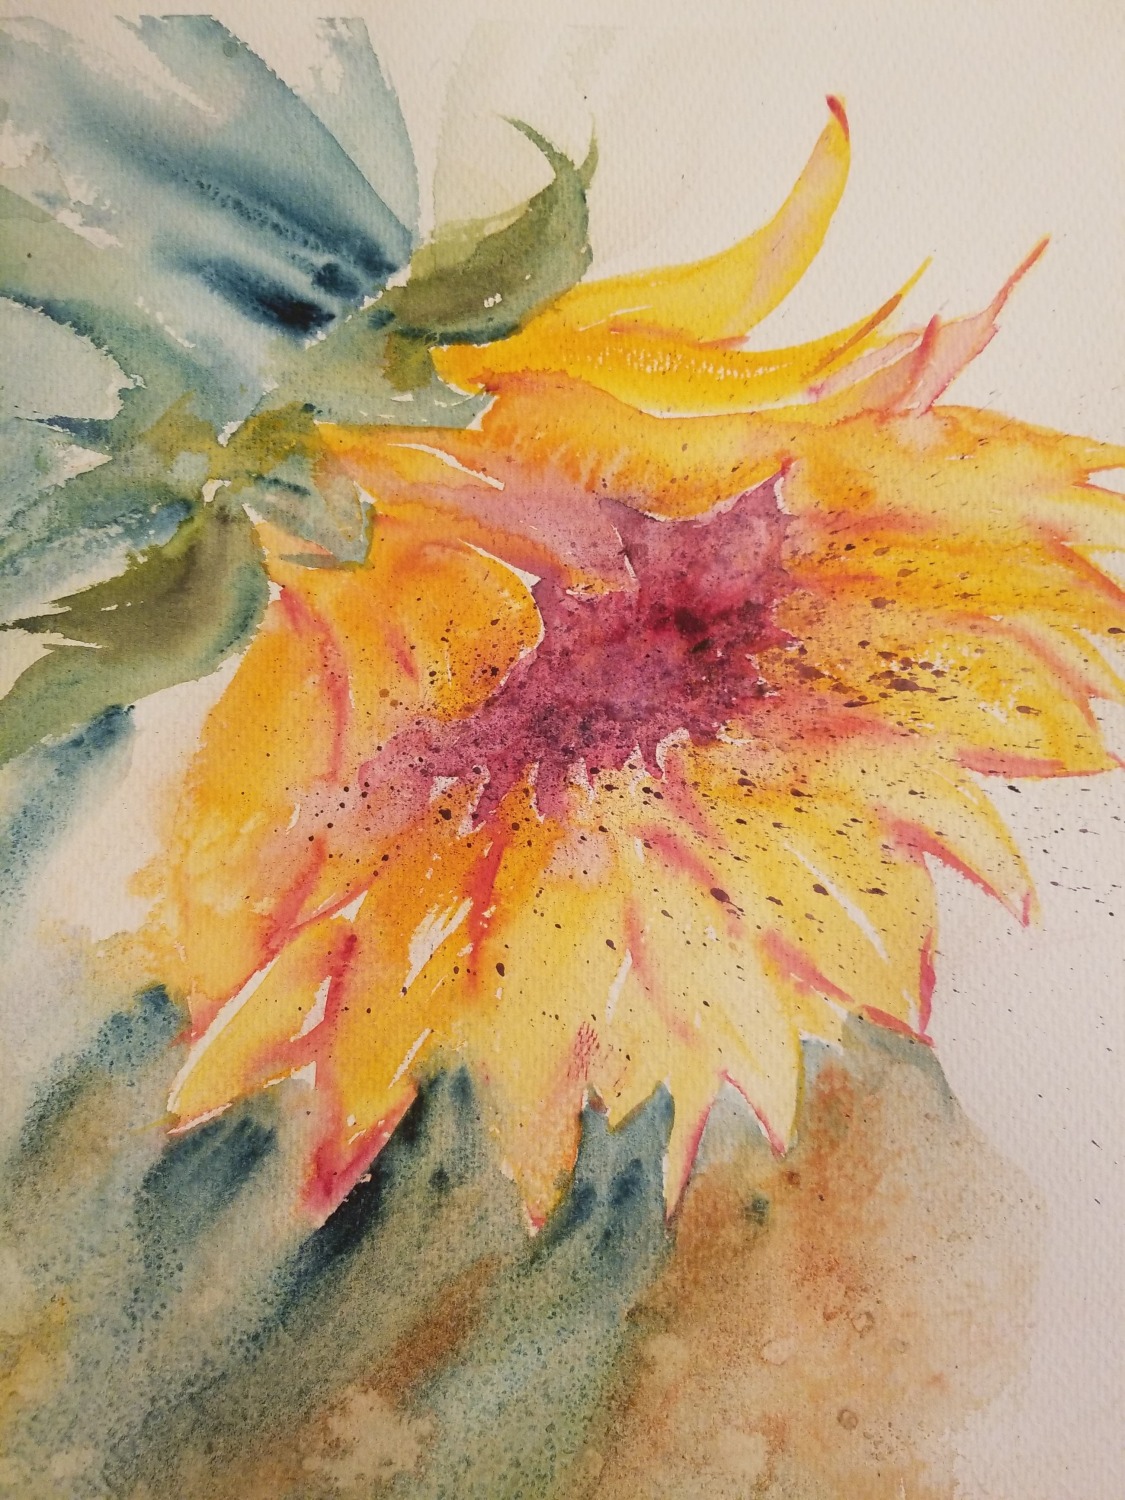 Loose Sunflower with pink center